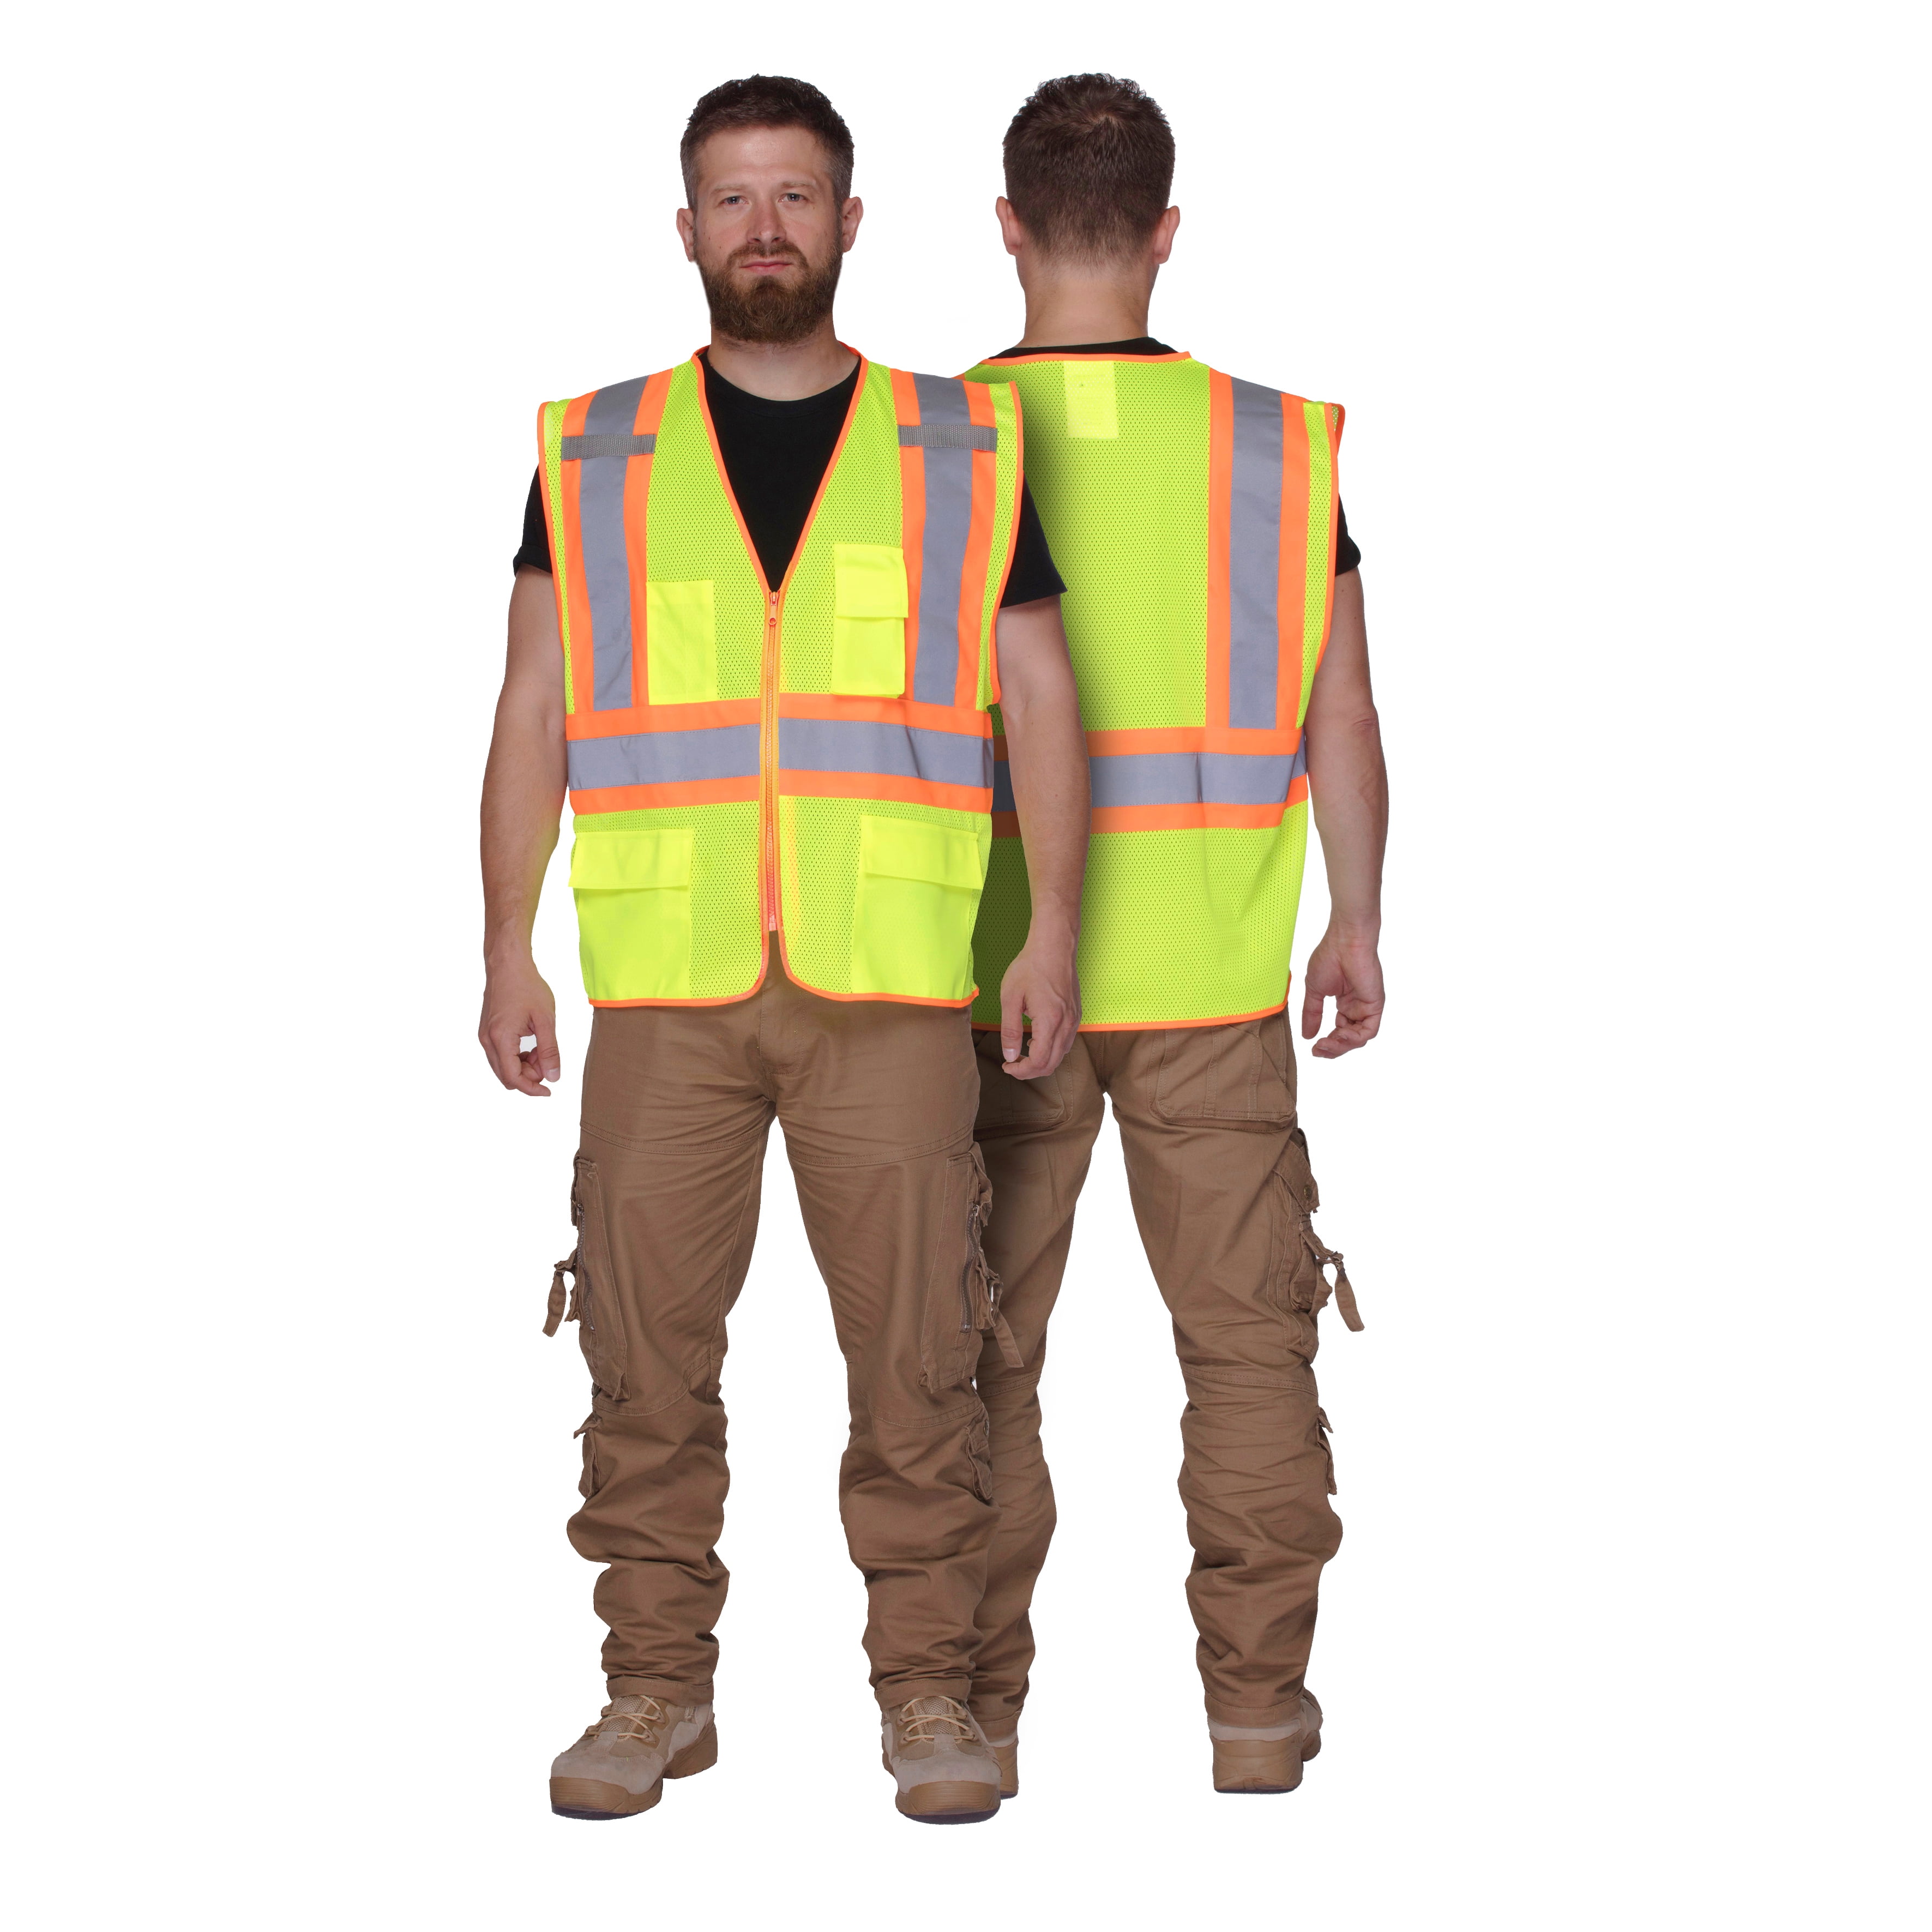 High Visibility Safety Vests - KAYGO KG0100, Safety Vests Reflective with  Pockets and Zipper,ANSI/ISEA 107-2015 Type R Class2 Not FR